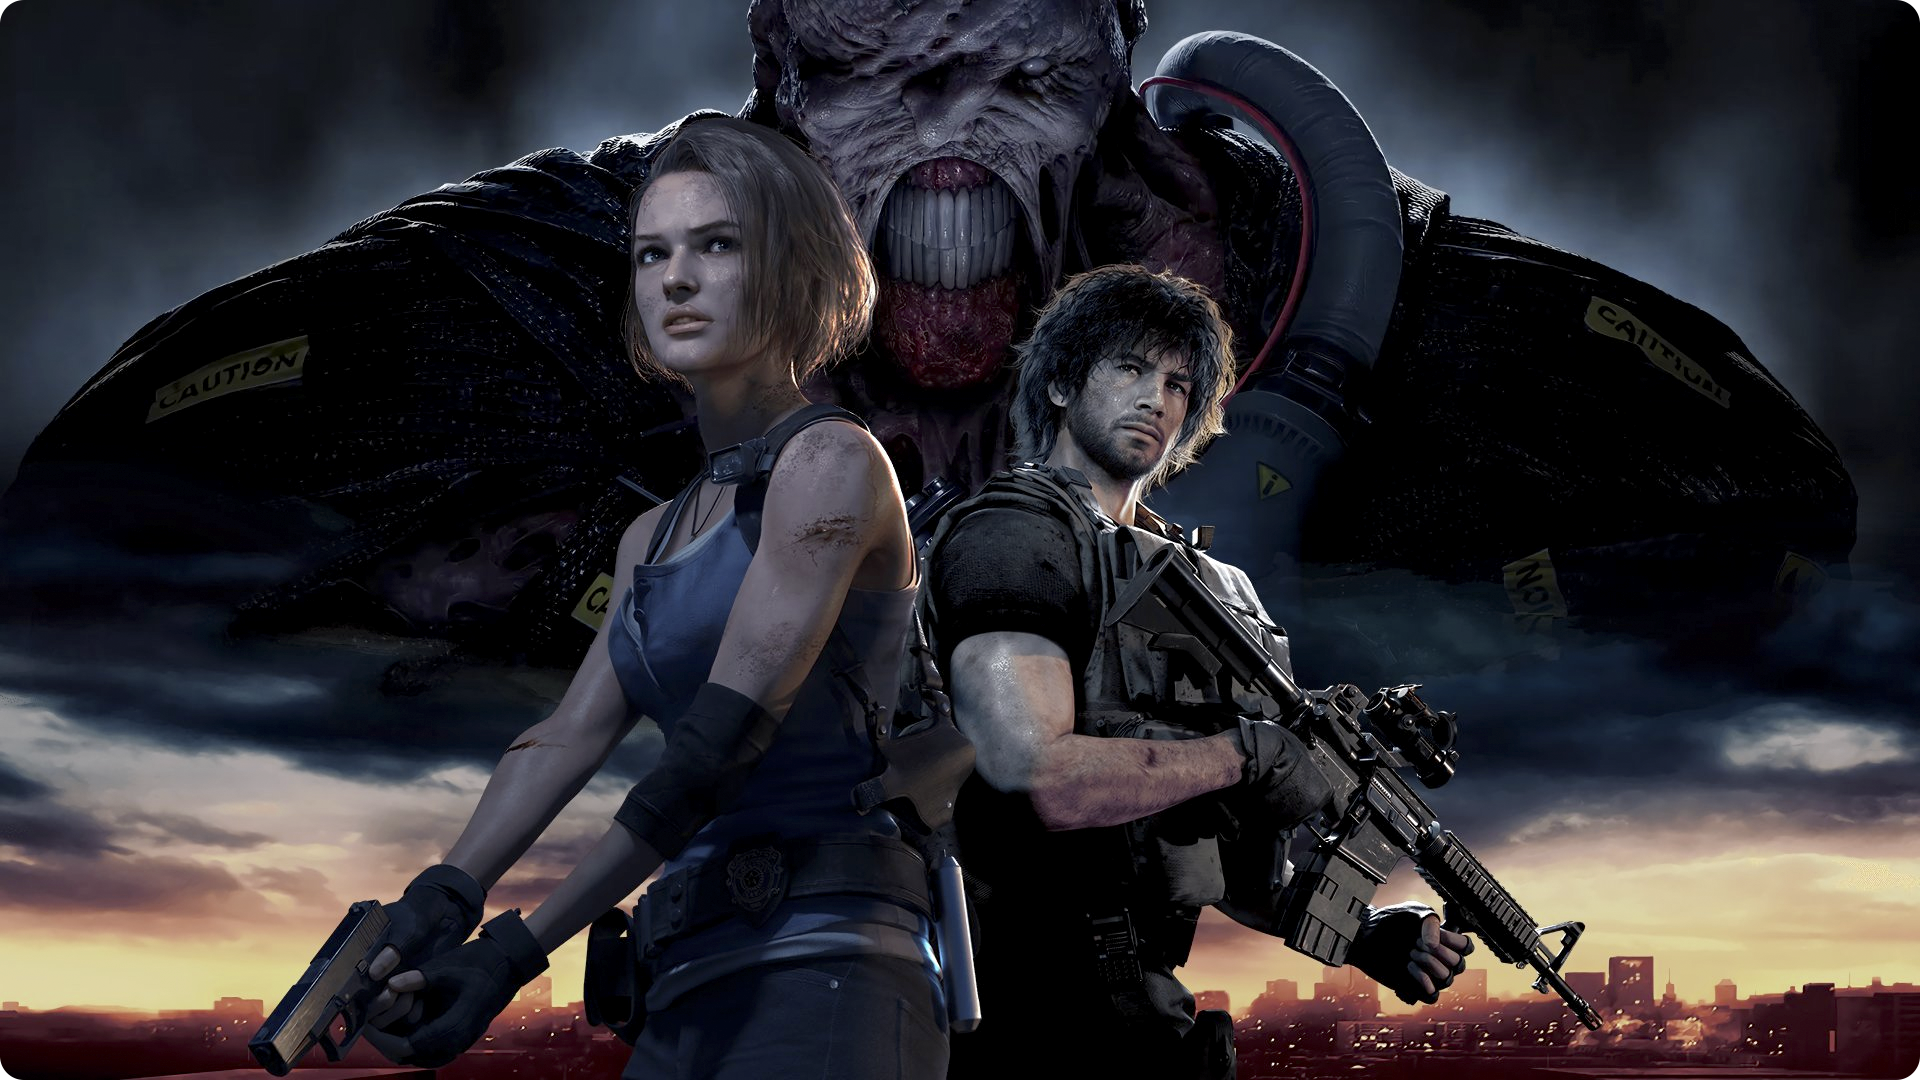 An introduction to Resident Evil promotional key art